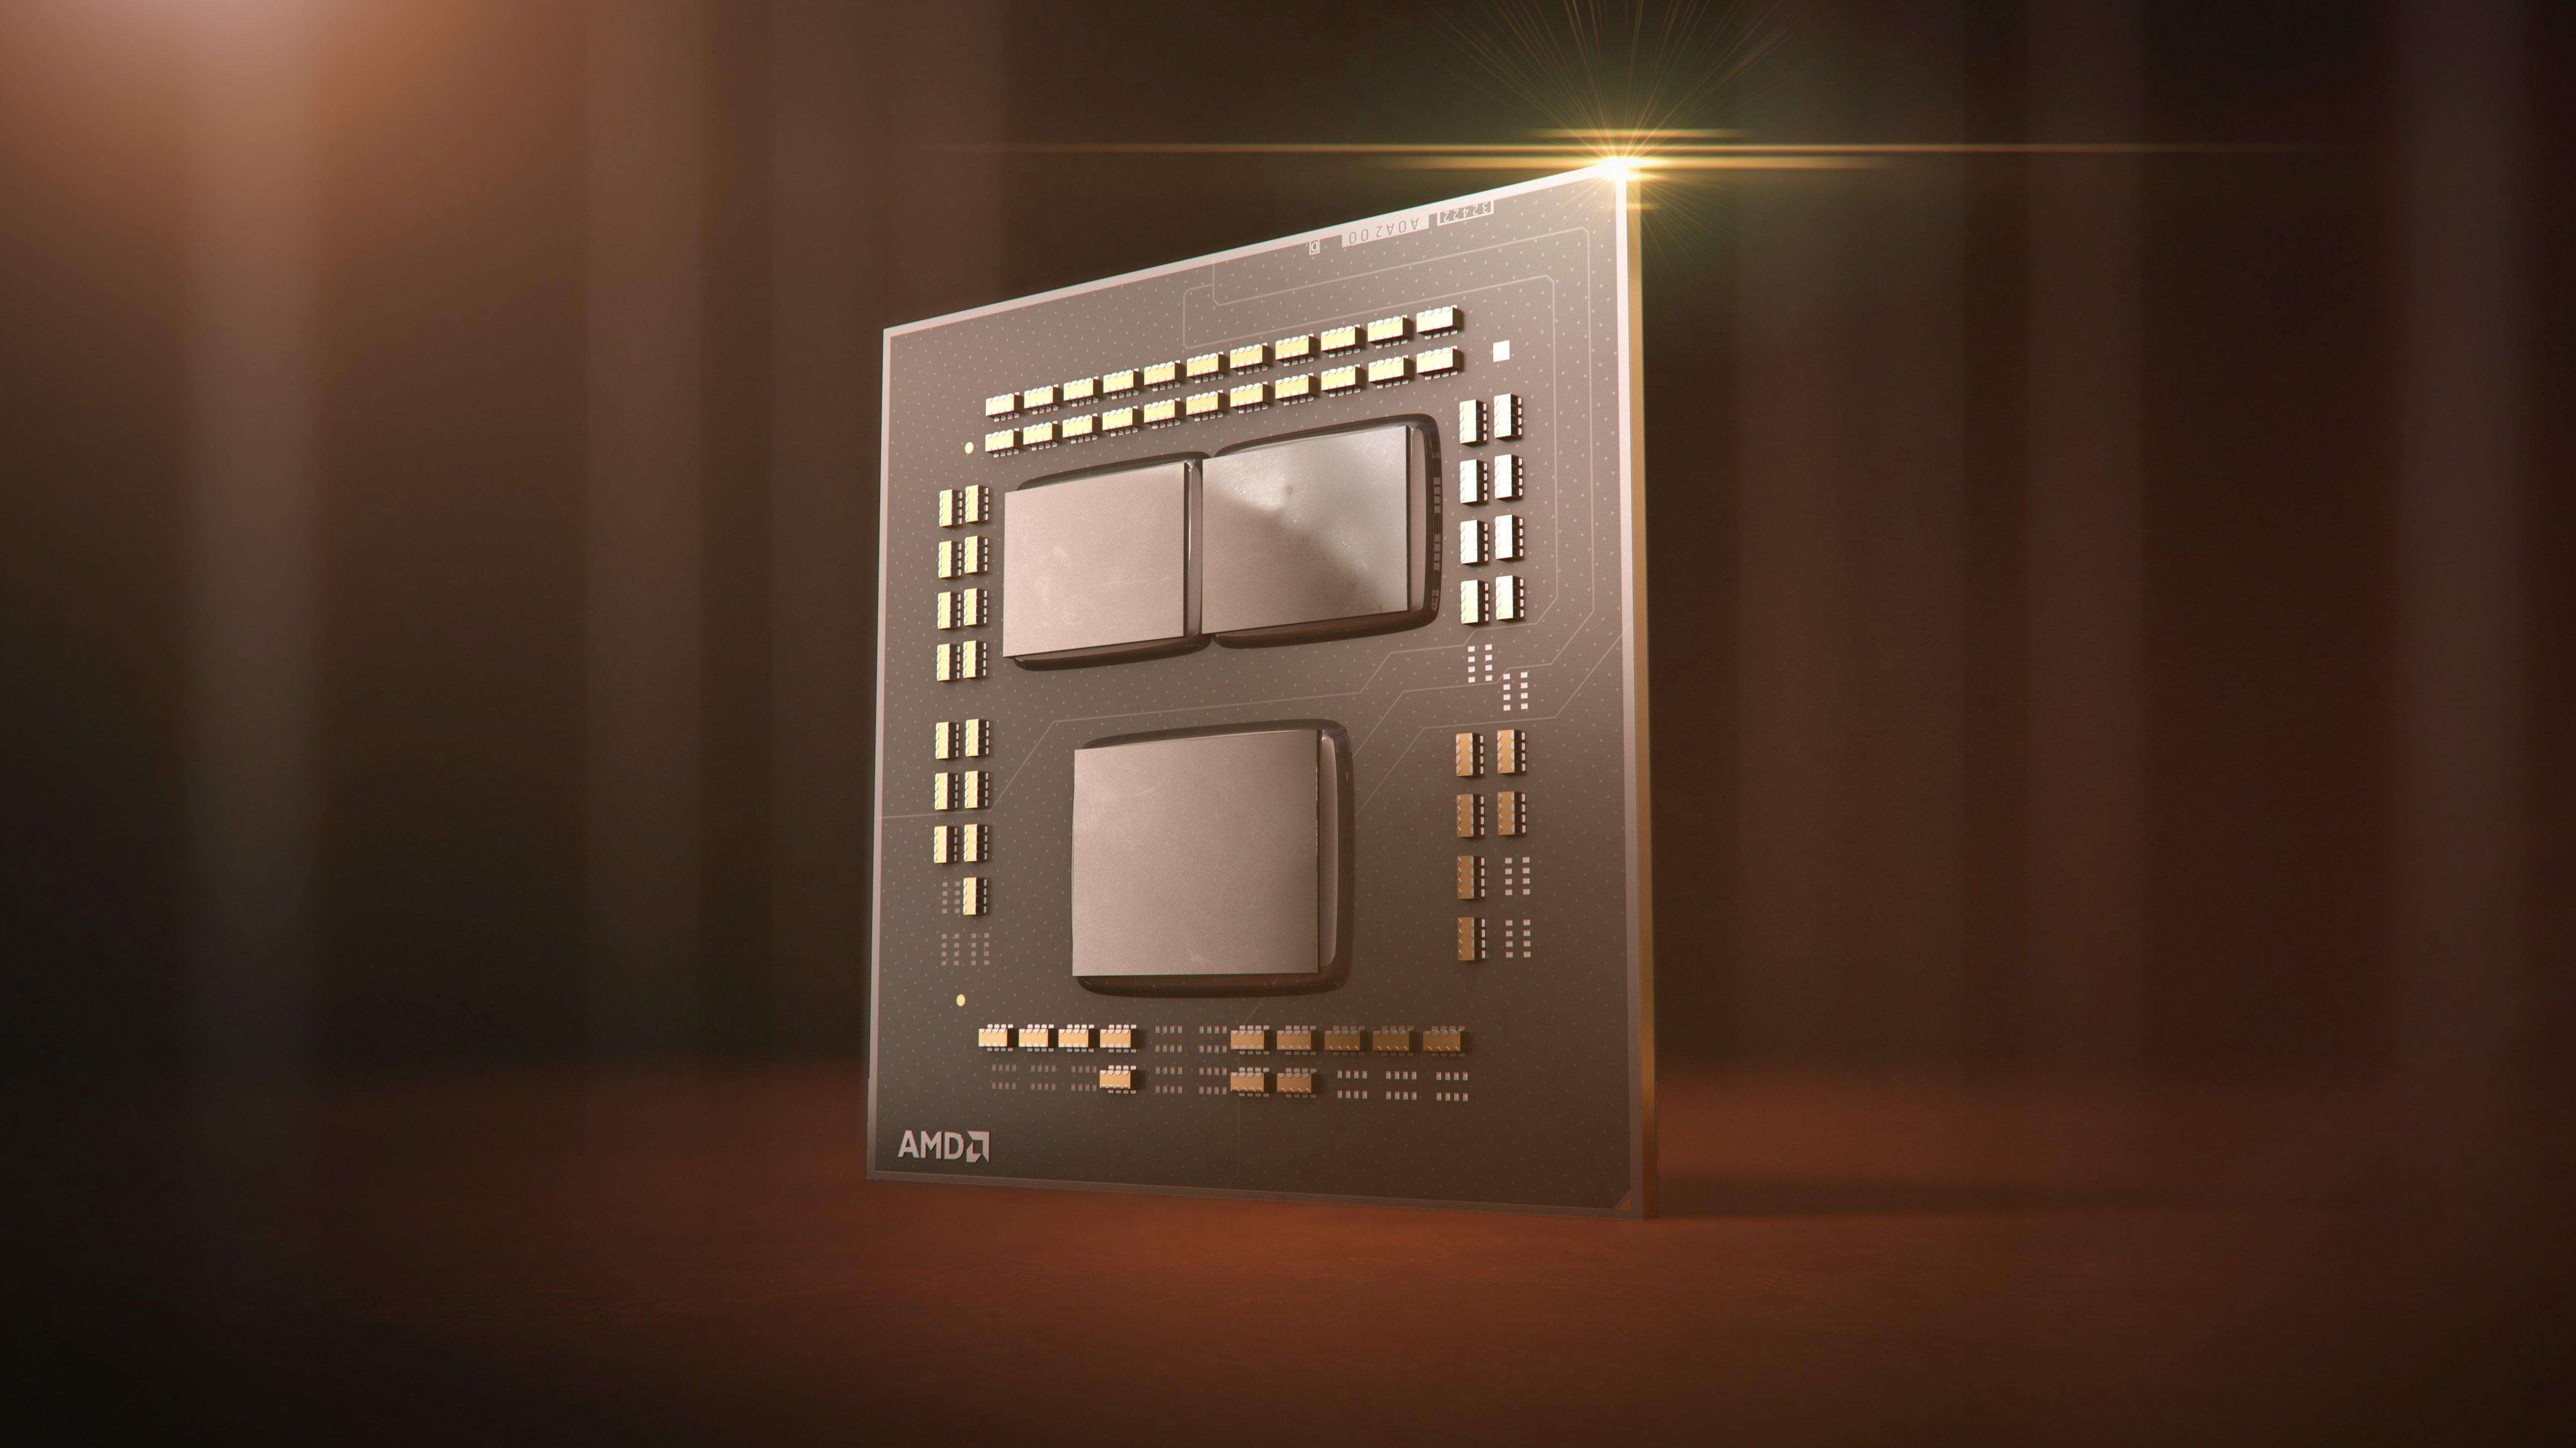 Ryzen 7-5800x Processor 8 Cores 16 Threads,AMD,Ryzen 7-5800X! Designed to  give you exceptional performance, this next-generation processor will allow  you to take your tasks and games to the next level. With a